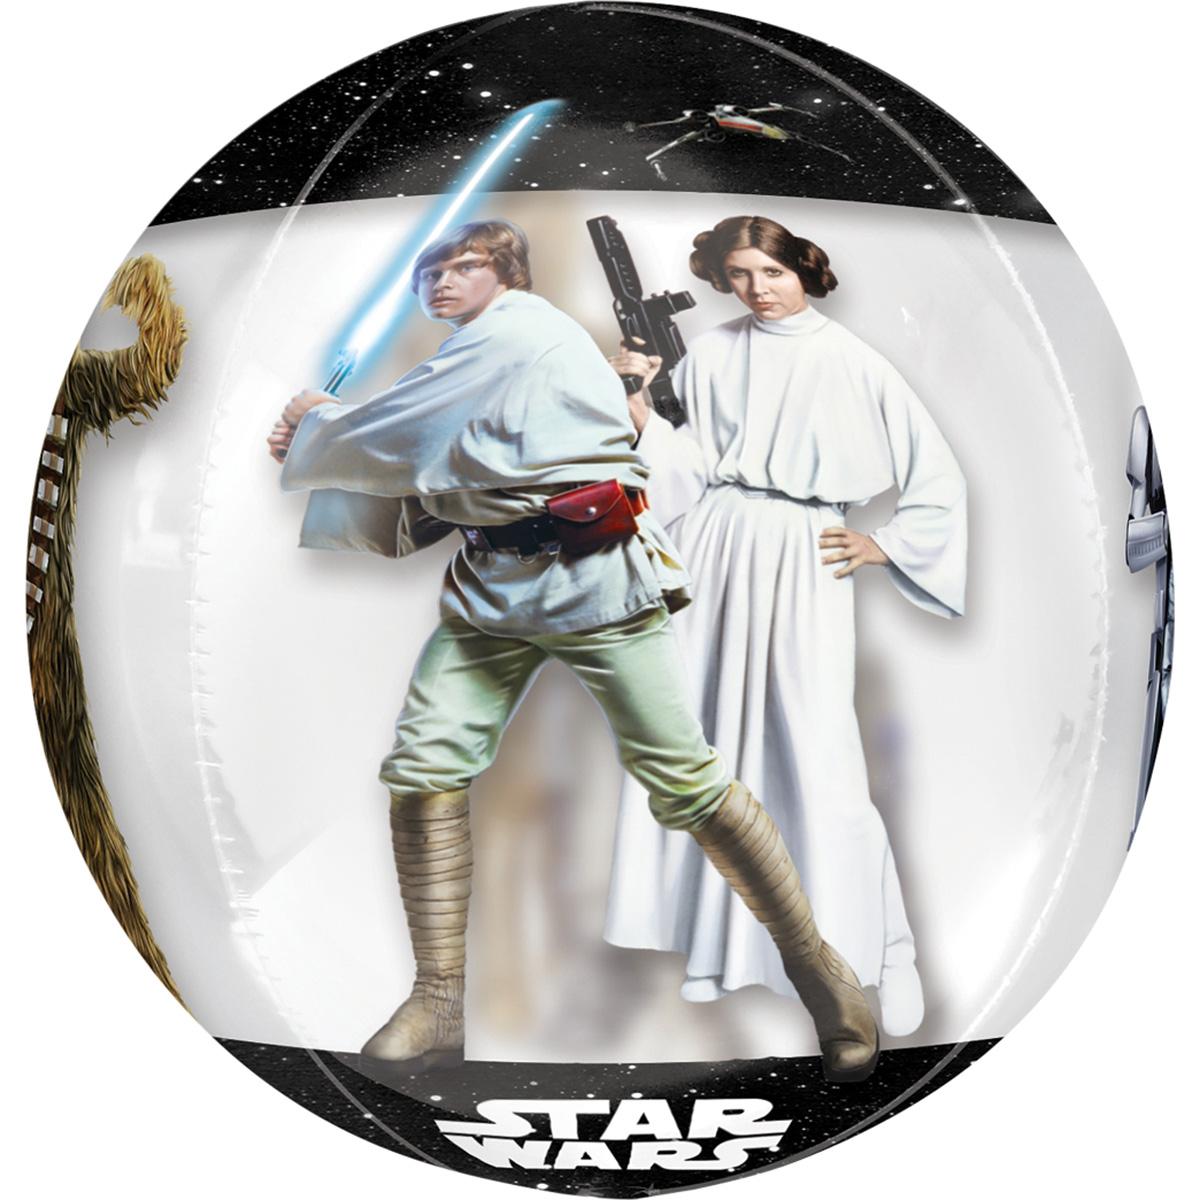 Star Wars Classic Orbz Balloon 38x40cm Balloons & Streamers - Party Centre - Party Centre